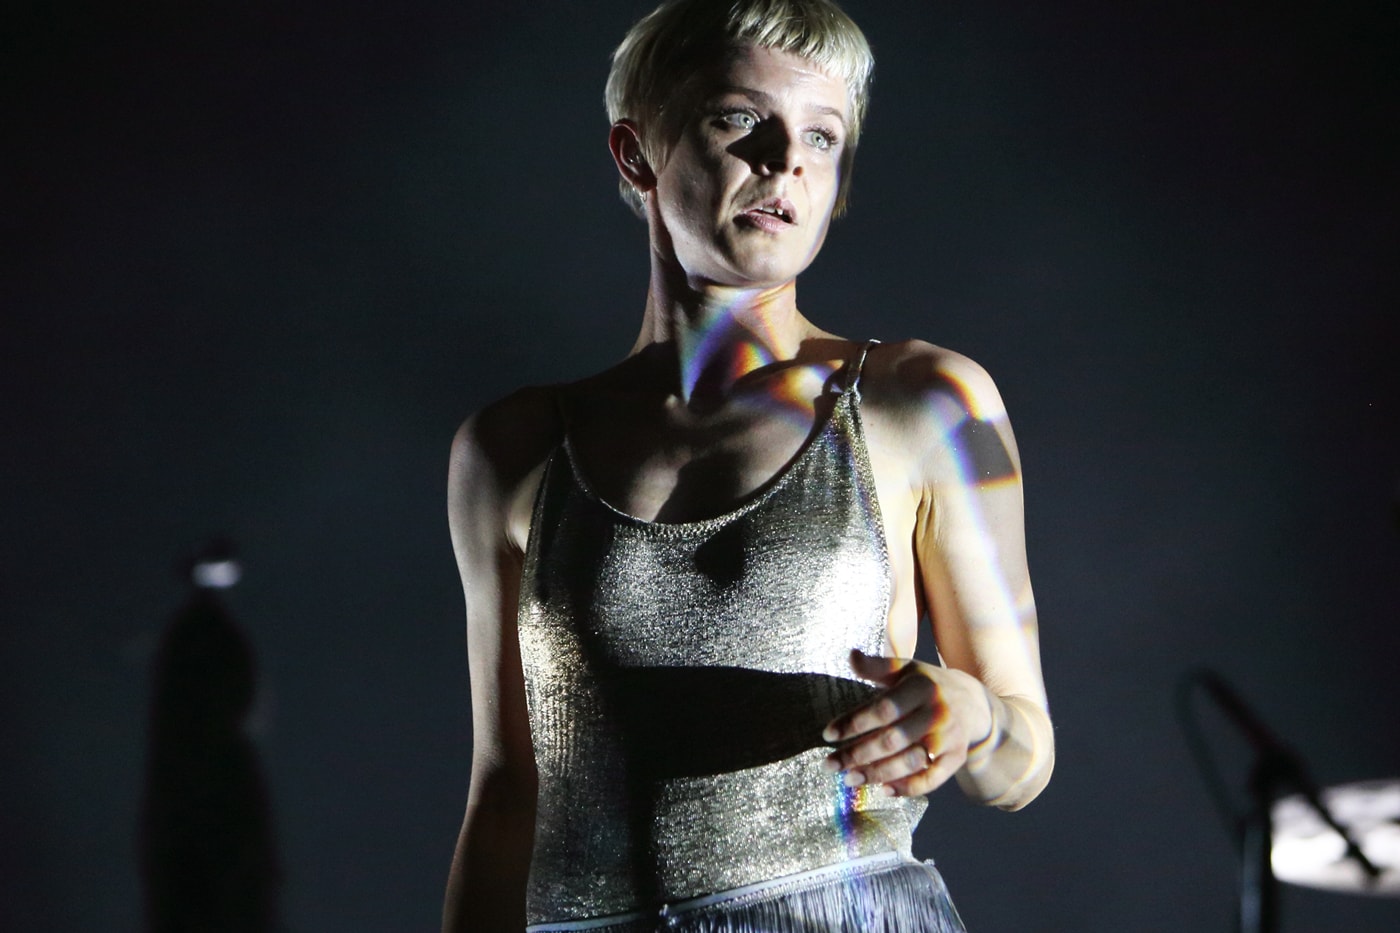 Robyn - Try Sleeping With A Broken Heart (Alicia Keys Cover)